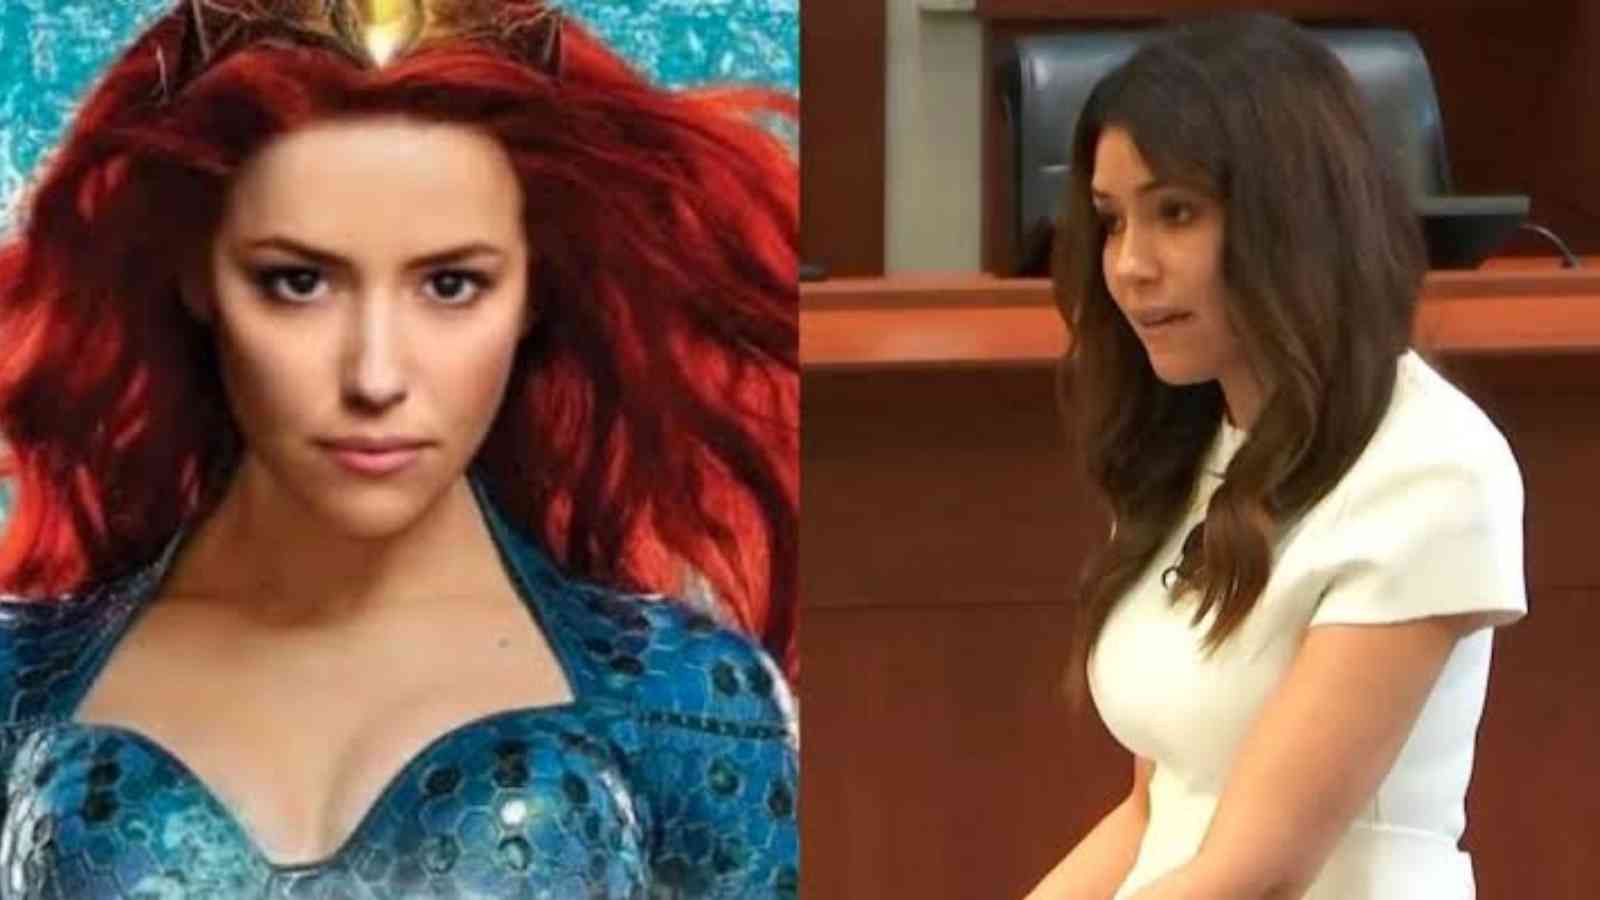 Fans are now suggesting that Warner Bros replace Amber Heard as Mera with Johnny Depp’s attorney Camille Vasquez in Aquaman 2 